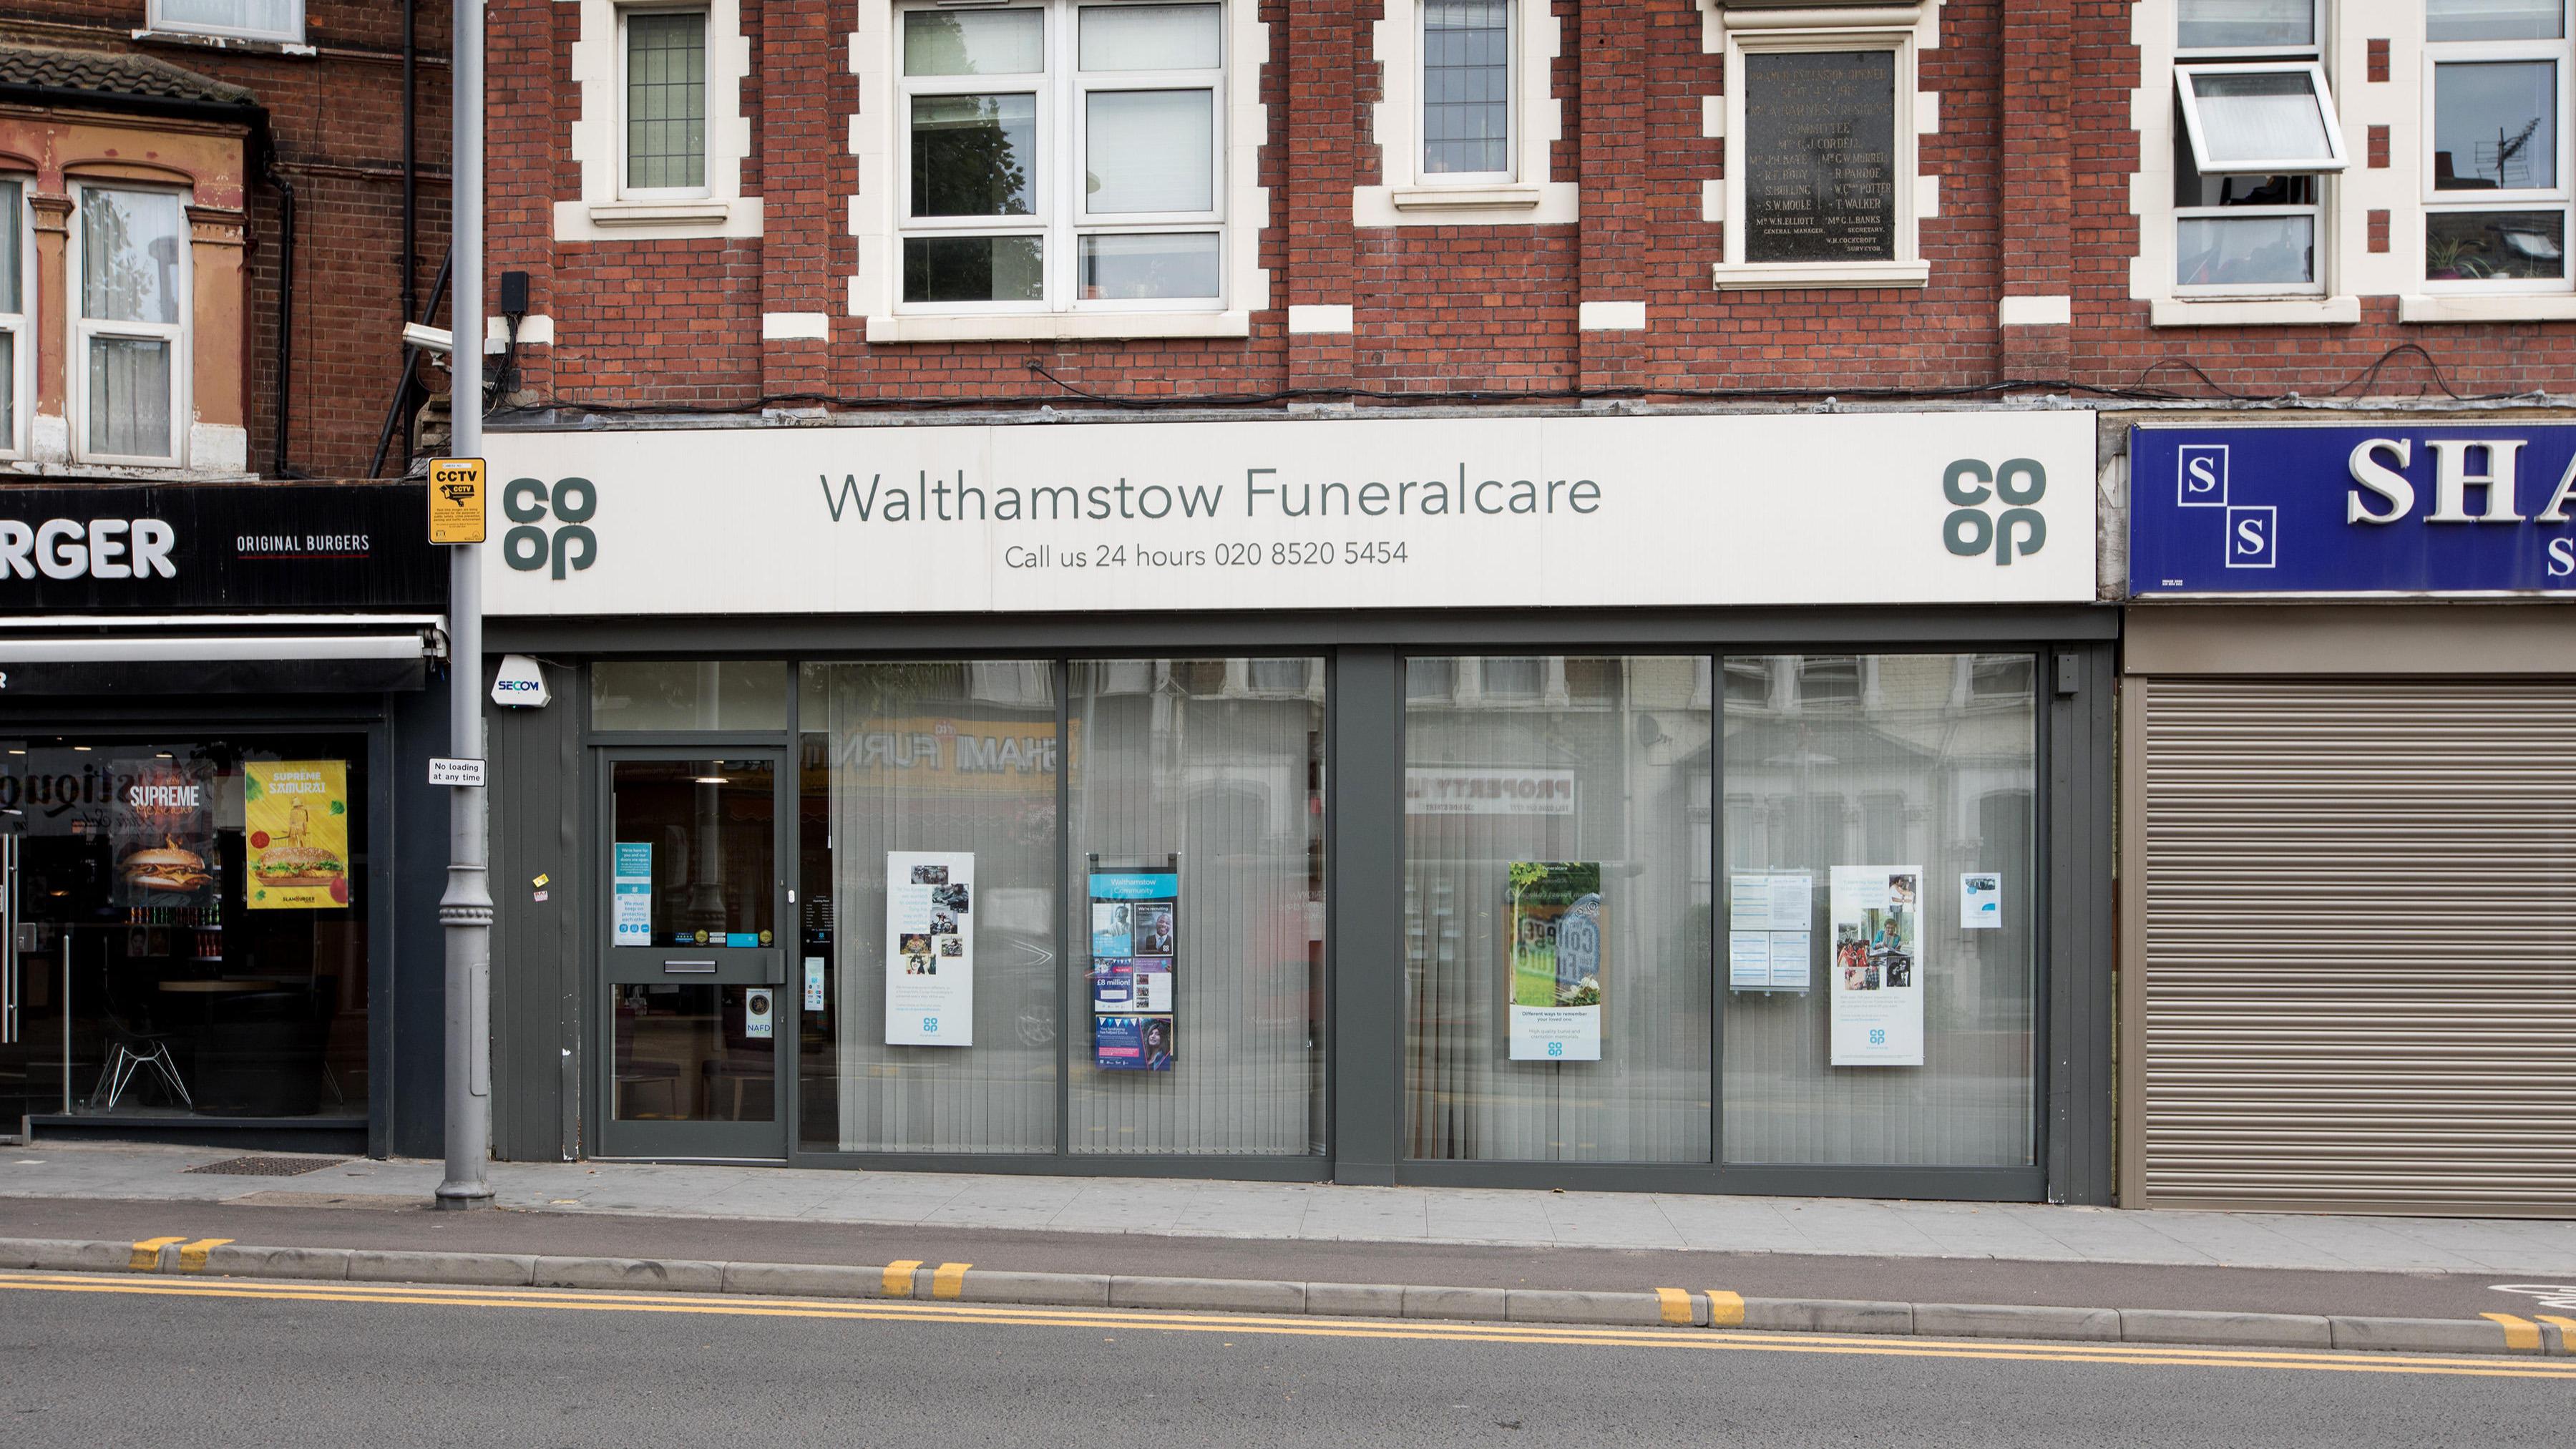 Images Co-op Funeralcare, Walthamstow